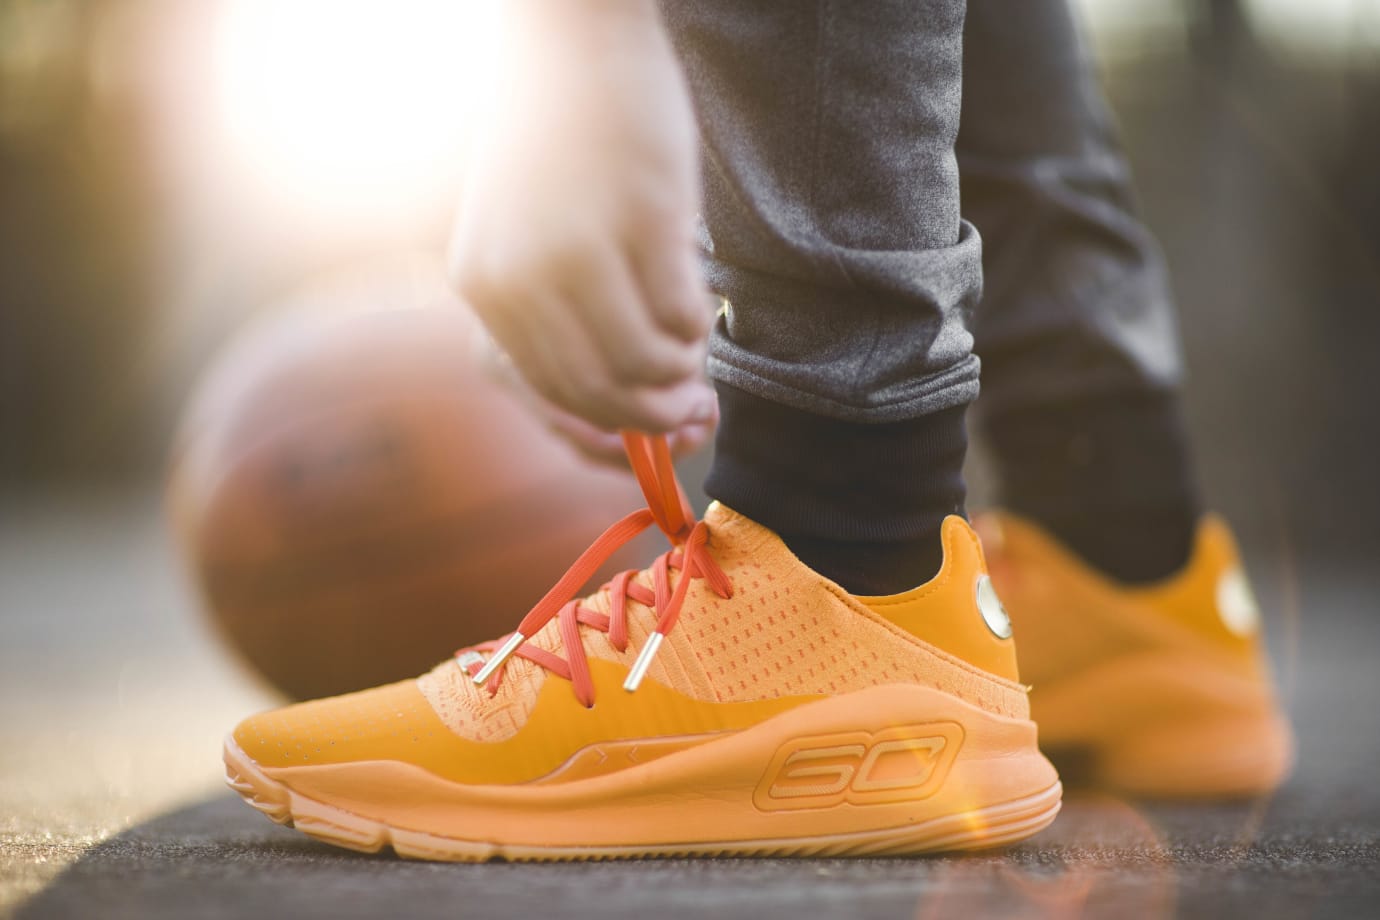 curry 5 low yellow